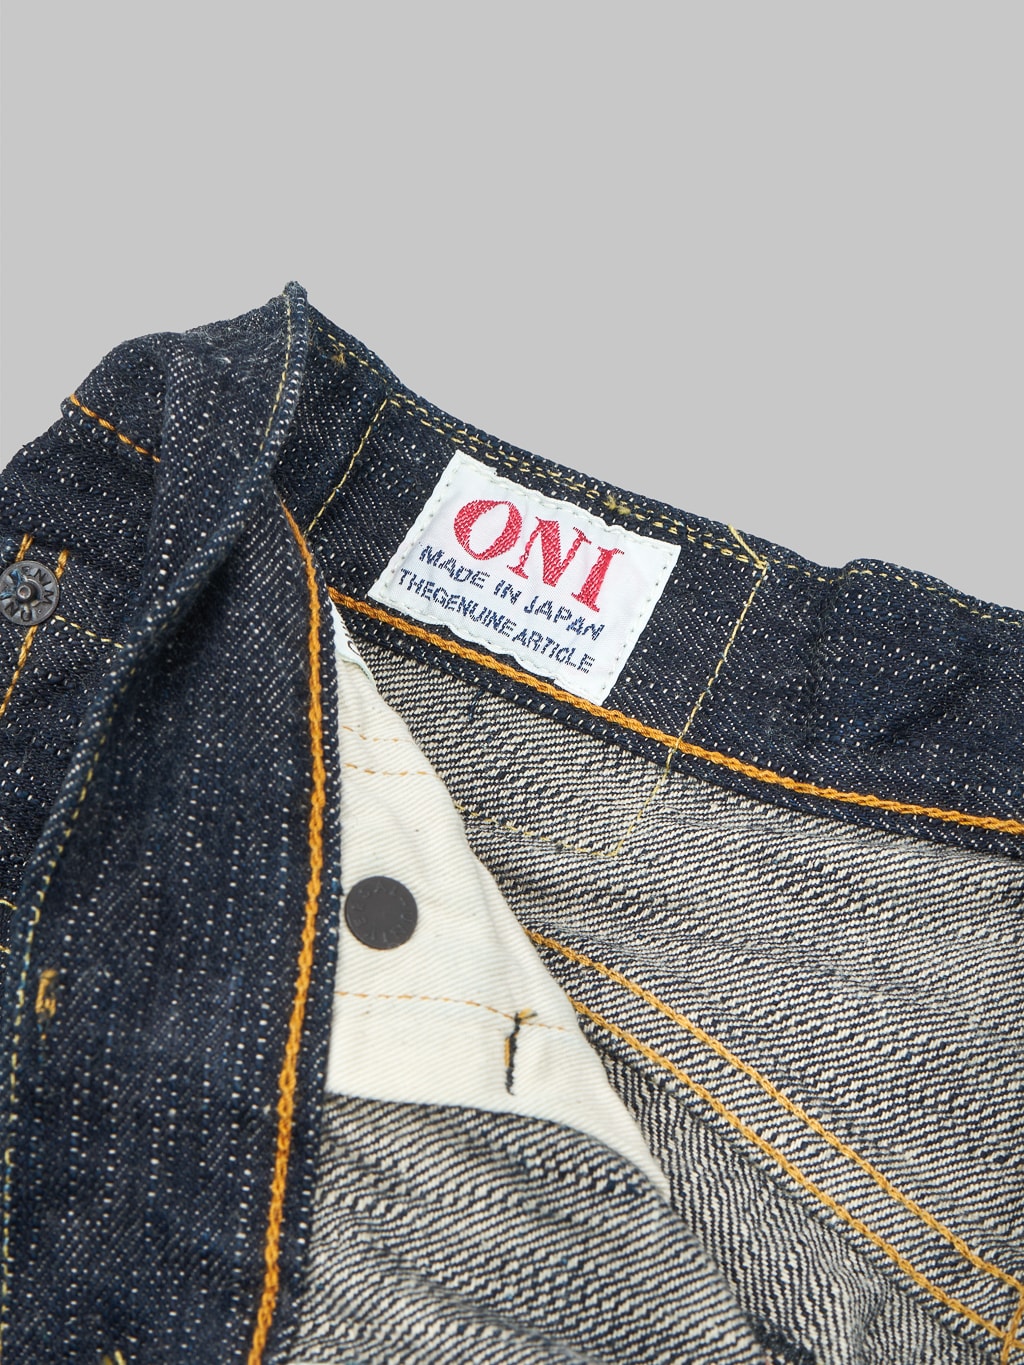 Oni denim kihannen relaxed tapered jeans brand label